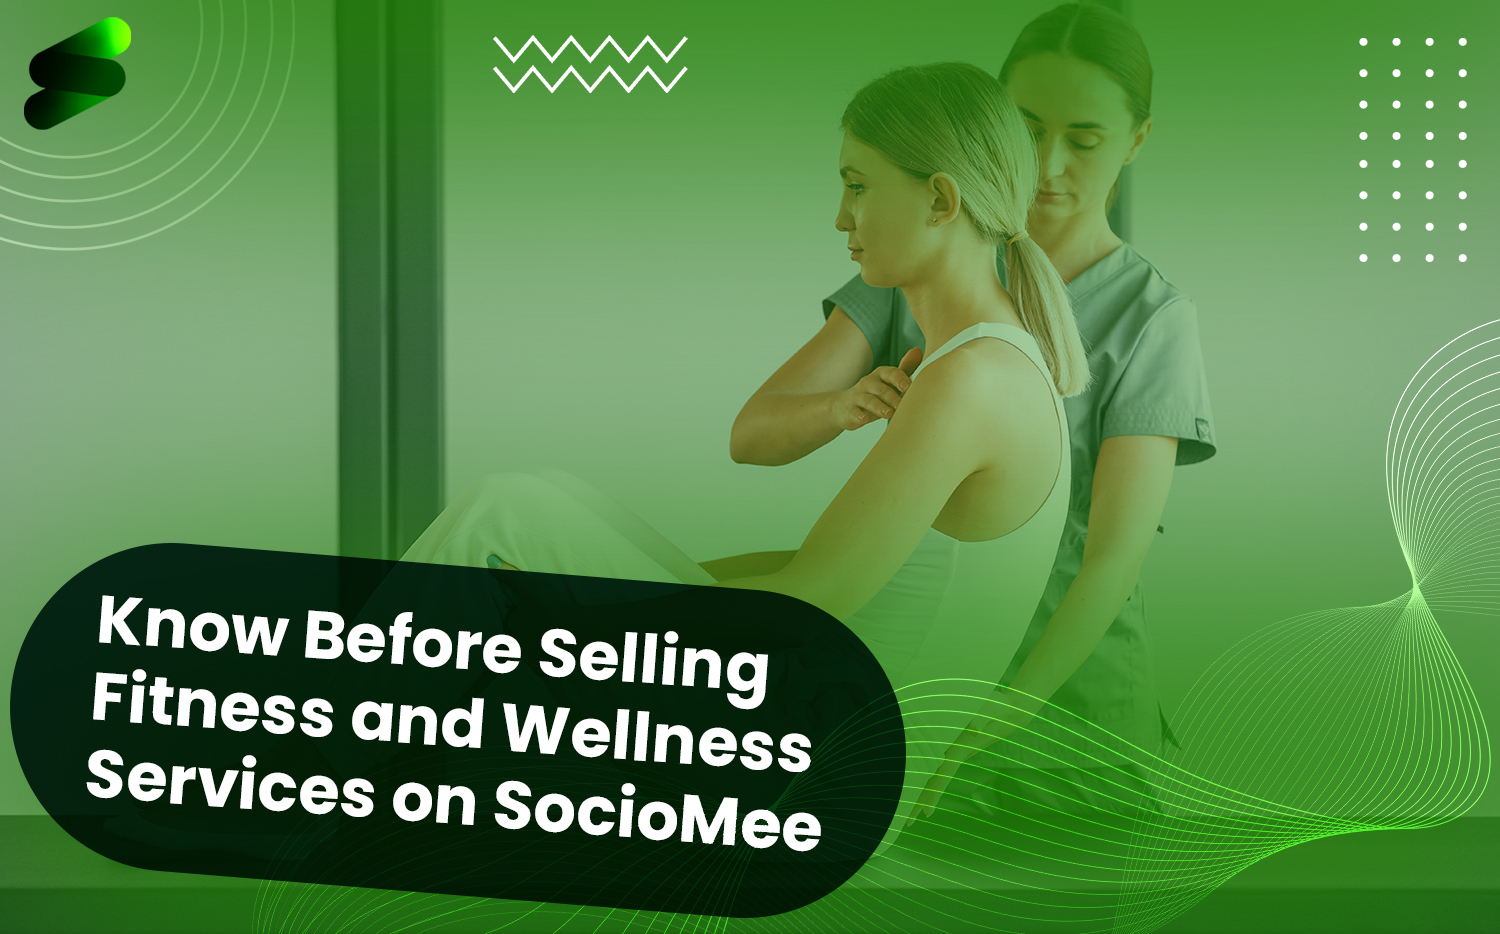 What You Need to Know Before Selling Fitness and Wellness Services on SocioMee